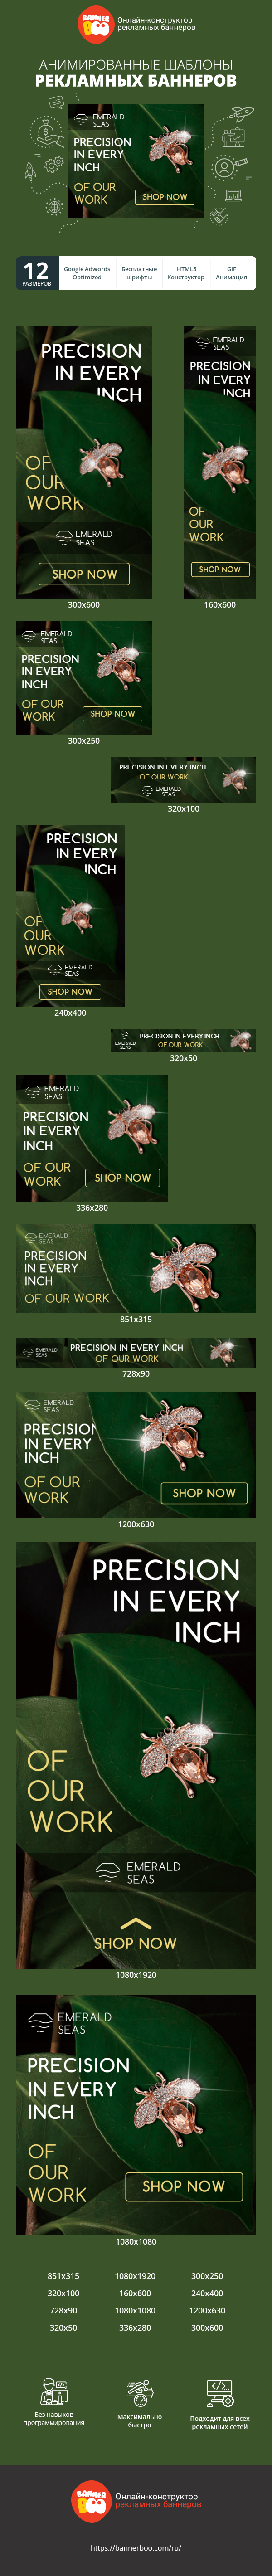 Banner ad template — Precision In Every Inch Of Our Work — Jewelry Store